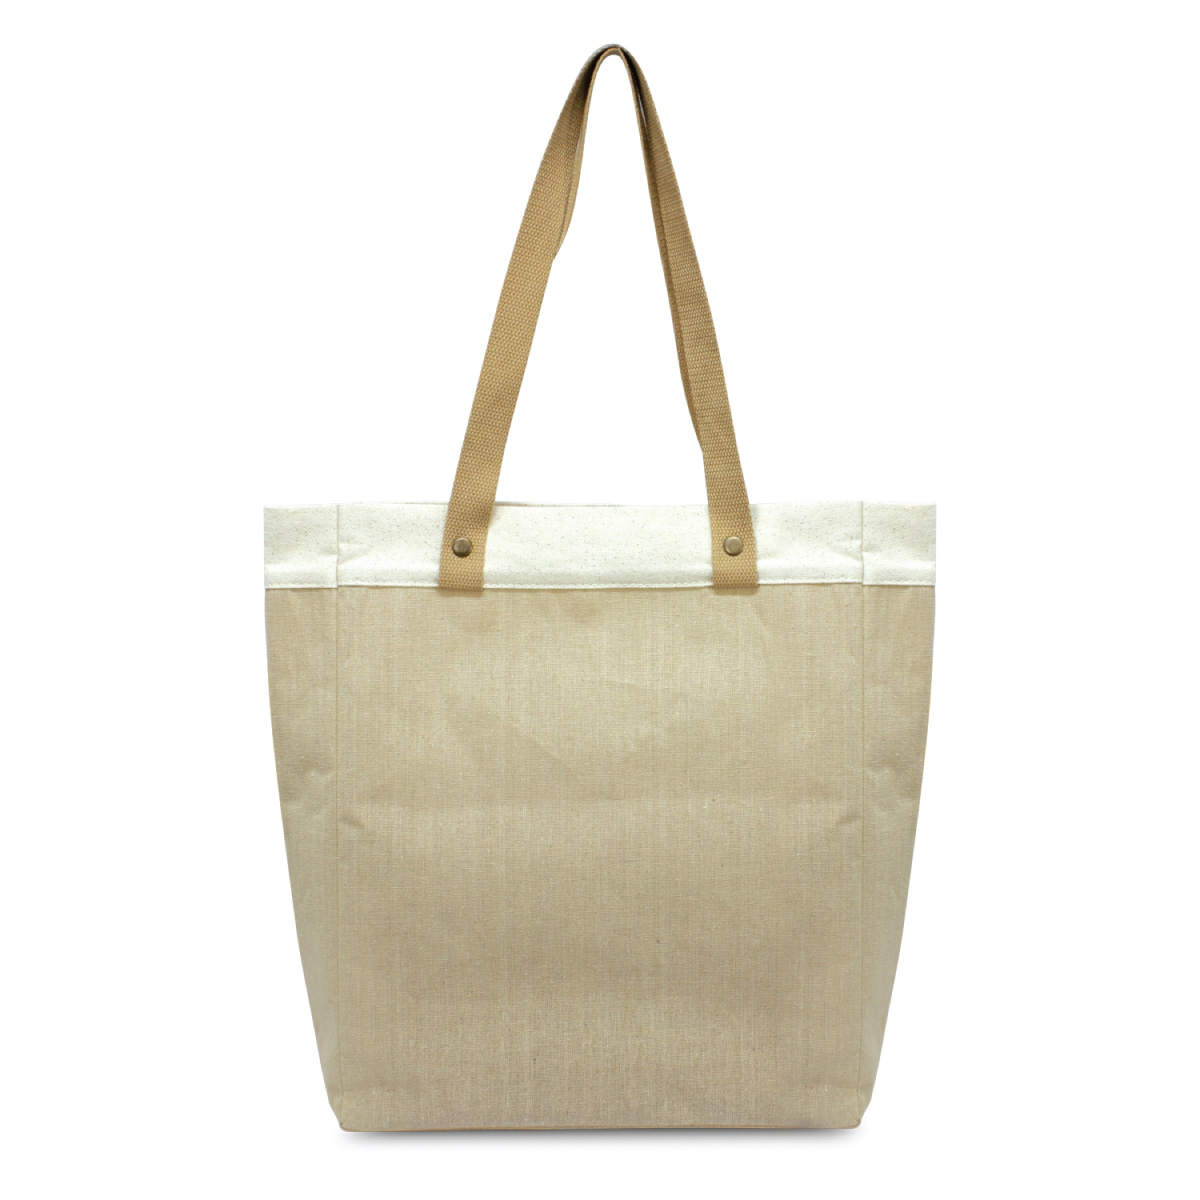 Promotional Fashionable Juco Tote Bags | Promotion Products